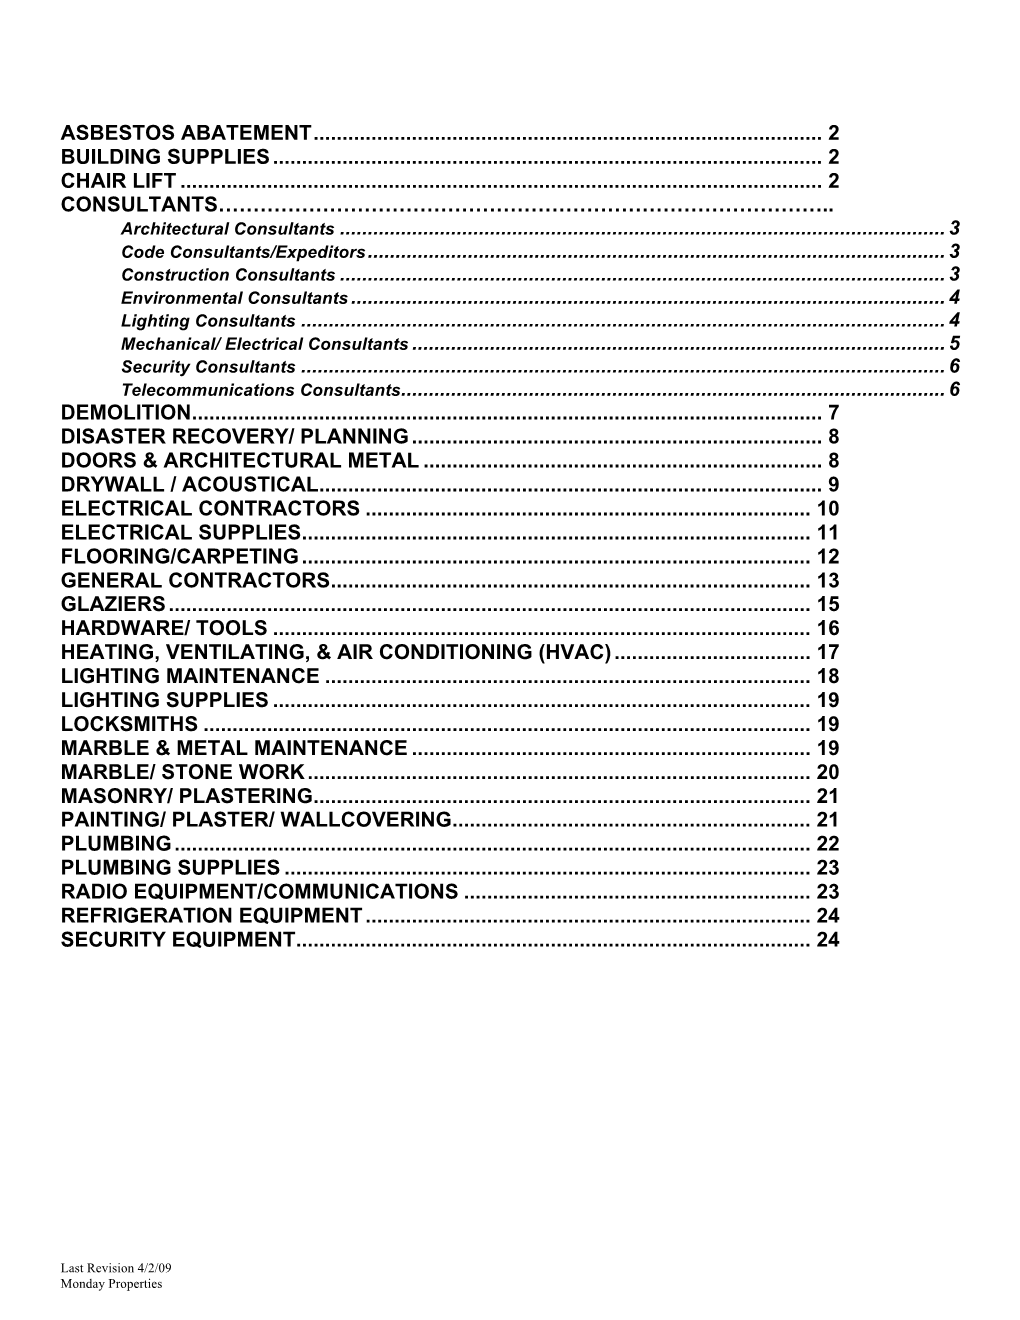 2009 Approved Contractors List for Tenants[2]